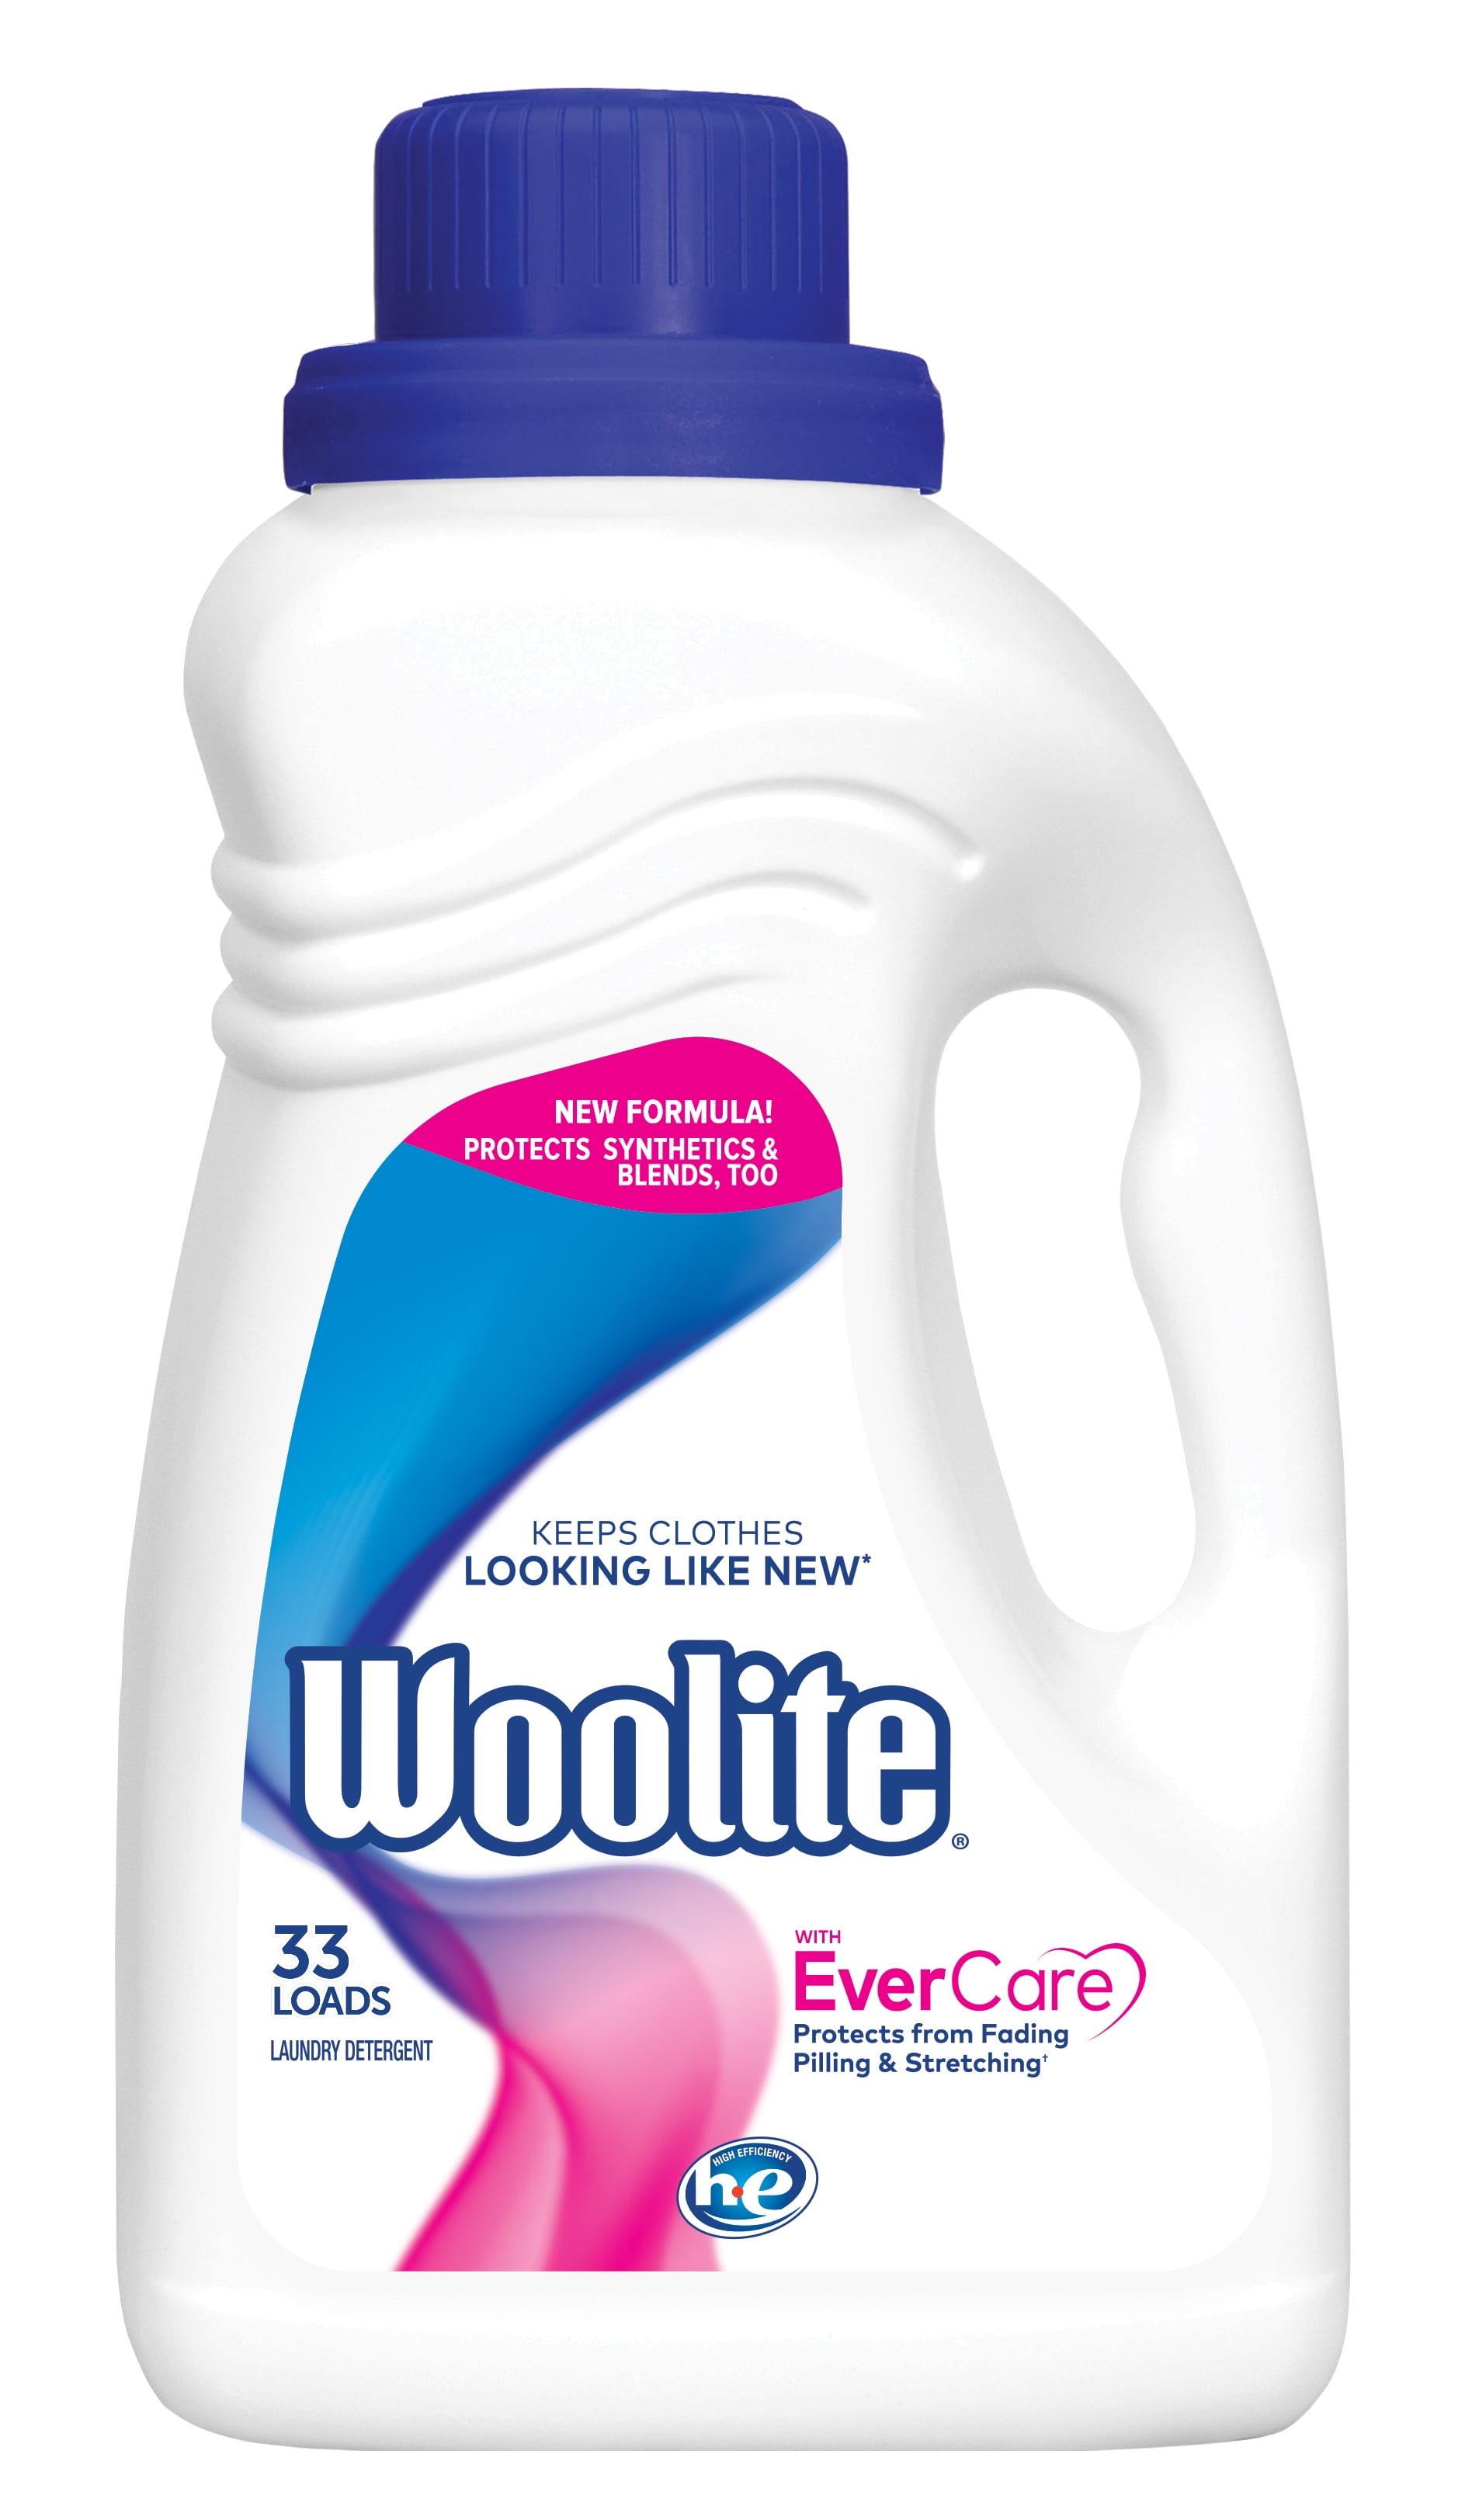 Woolite 50 oz. Everyday Laundry Detergent 62338-77940 - The Home Depot